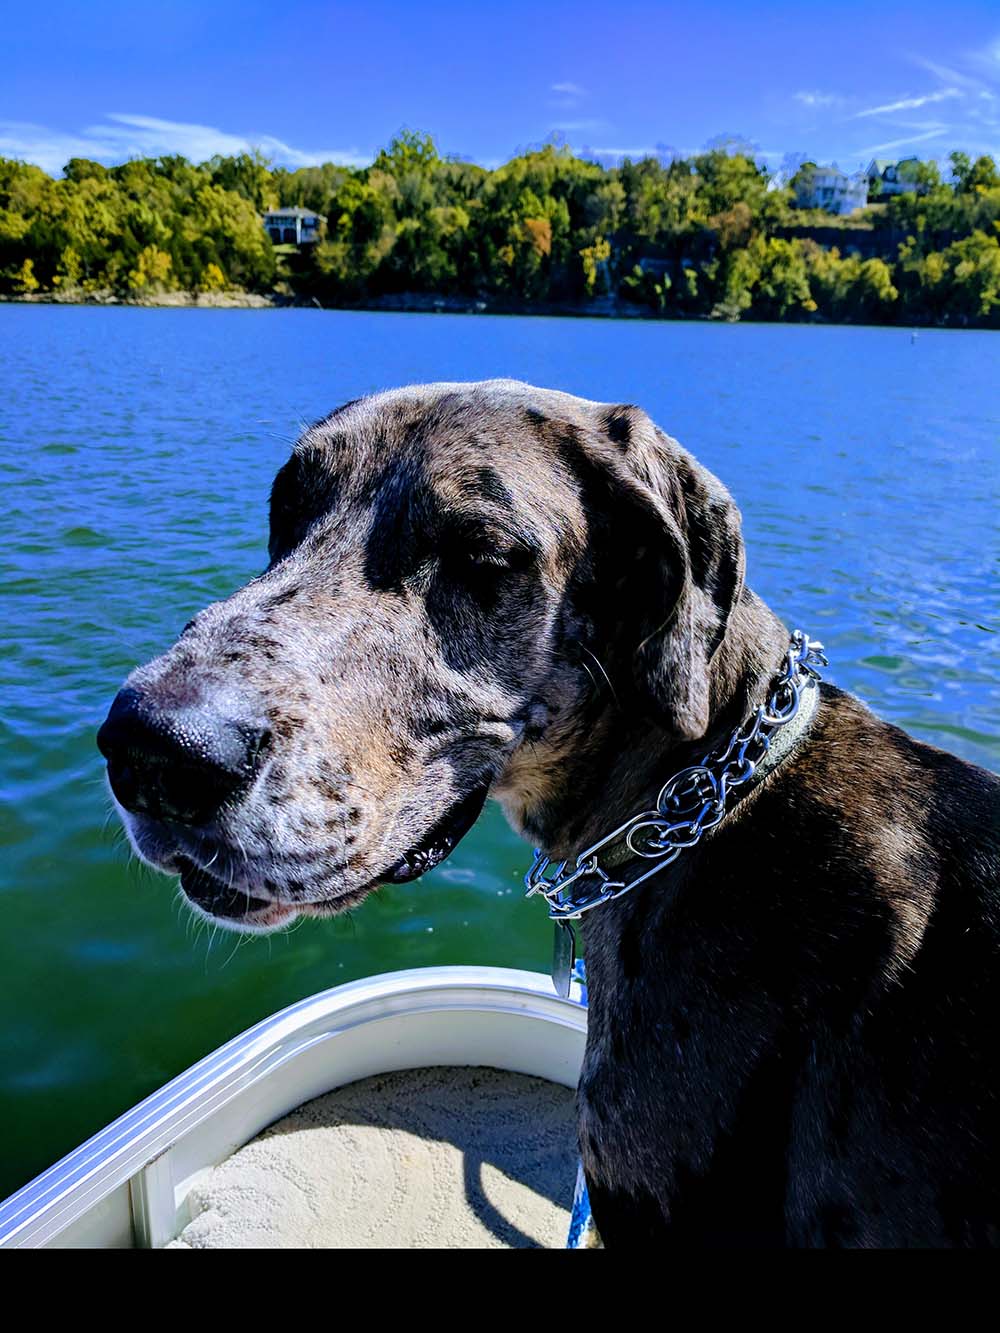 This big guy loves the lake.